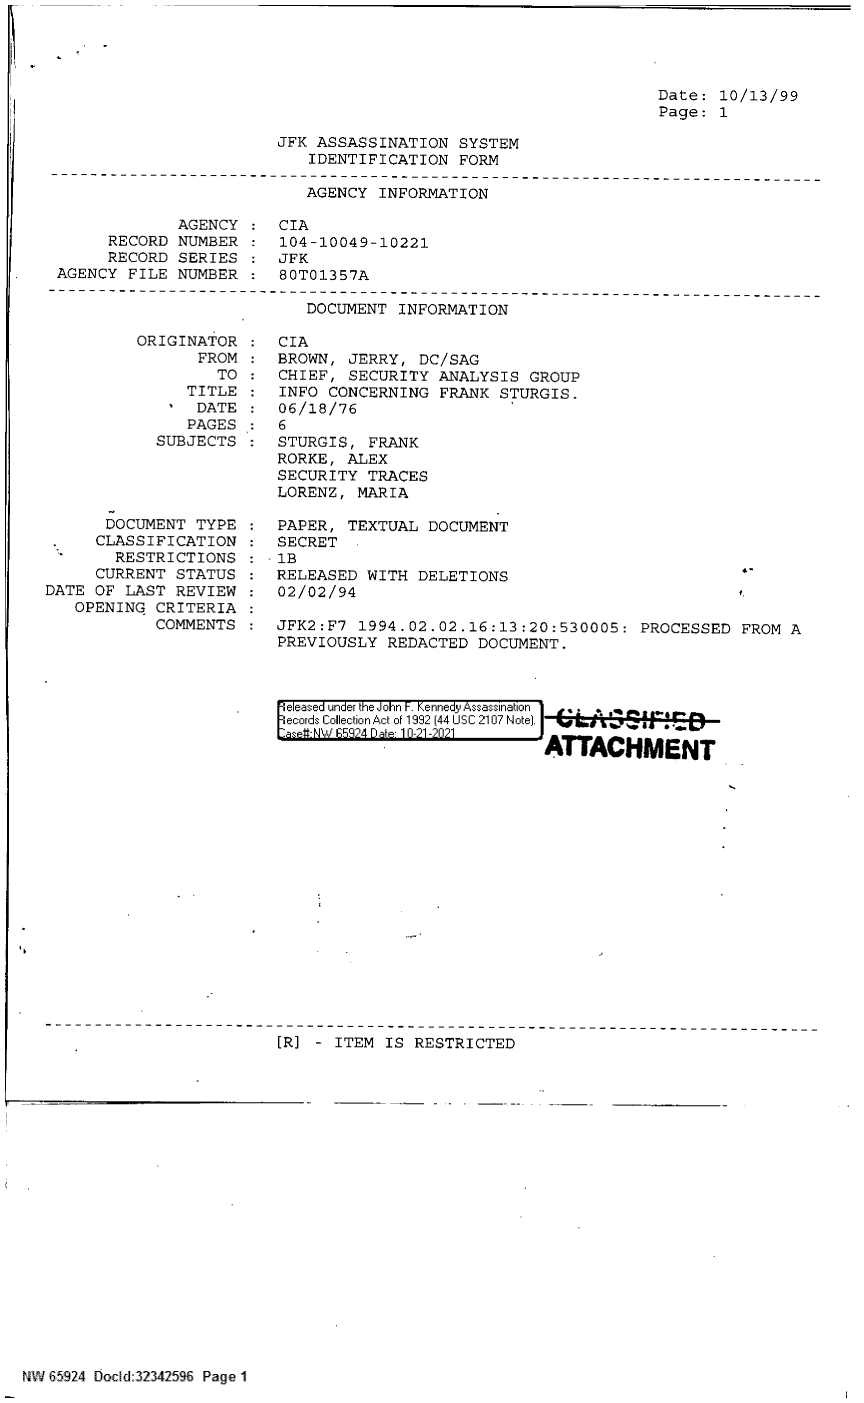 handle is hein.jfk/jfkarch60028 and id is 1 raw text is: Date: 10/13/99
Page: 1

JFK ASSASSINATION SYSTEM
IDENTIFICATION FORM

AGENCY INFORMATION
AGENCY    CIA
RECORD NUMBER    104-10049-10221
RECORD SERIES : JFK
AGENCY FILE NUMBER : 80T01357A

DOCUMENT INFORMATION

ORIGINATOR
FROM
TO
TITLE
' DATE
PAGES
SUBJECTS
DOCUMENT TYPE
CLASSIFICATION
RESTRICTIONS
CURRENT STATUS
DATE OF LAST REVIEW
OPENING CRITERIA
COMMENTS

CIA
BROWN, JERRY, DC/SAG
CHIEF, SECURITY ANALYSIS GROUP
INFO CONCERNING FRANK STURGIS.
06/18/76
6
STURGIS, FRANK
RORKE, ALEX
SECURITY TRACES
LORENZ, MARIA

PAPER, TEXTUAL DOCUMENT
SECRET
- 1B
RELEASED WITH DELETIONS
02/02/94

JFK2:F7 1994.02.02.16:13:20:530005: PROCESSED FROM A
PREVIOUSLY REDACTED DOCUMENT.
ie eased under the John F. Kennedy Assassination 1 .
ecords Collection Act of 1992 (44 USC 2107 Note).
as -W V 59 24 Date 1T0-21A-021
ATTACHMENT

[R] - ITEM IS RESTRICTED

NW 65924 Bocd:32342596 Page 1

4-


